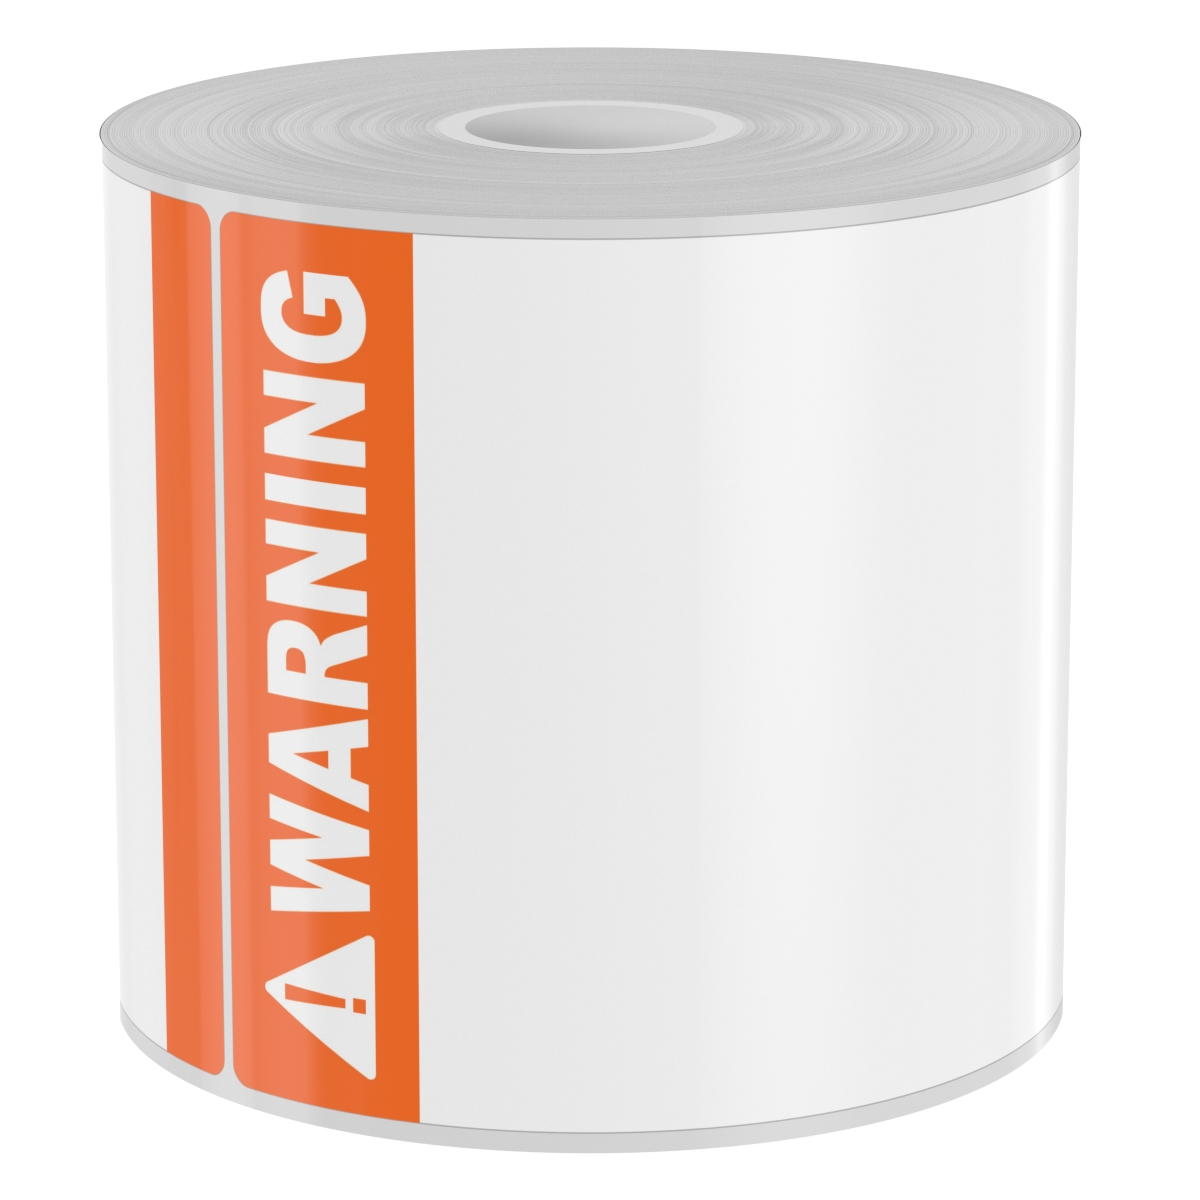 Ask a question about 250 4" x 6" High-Performance Die-Cut Orange Double Band White Warning Portrait